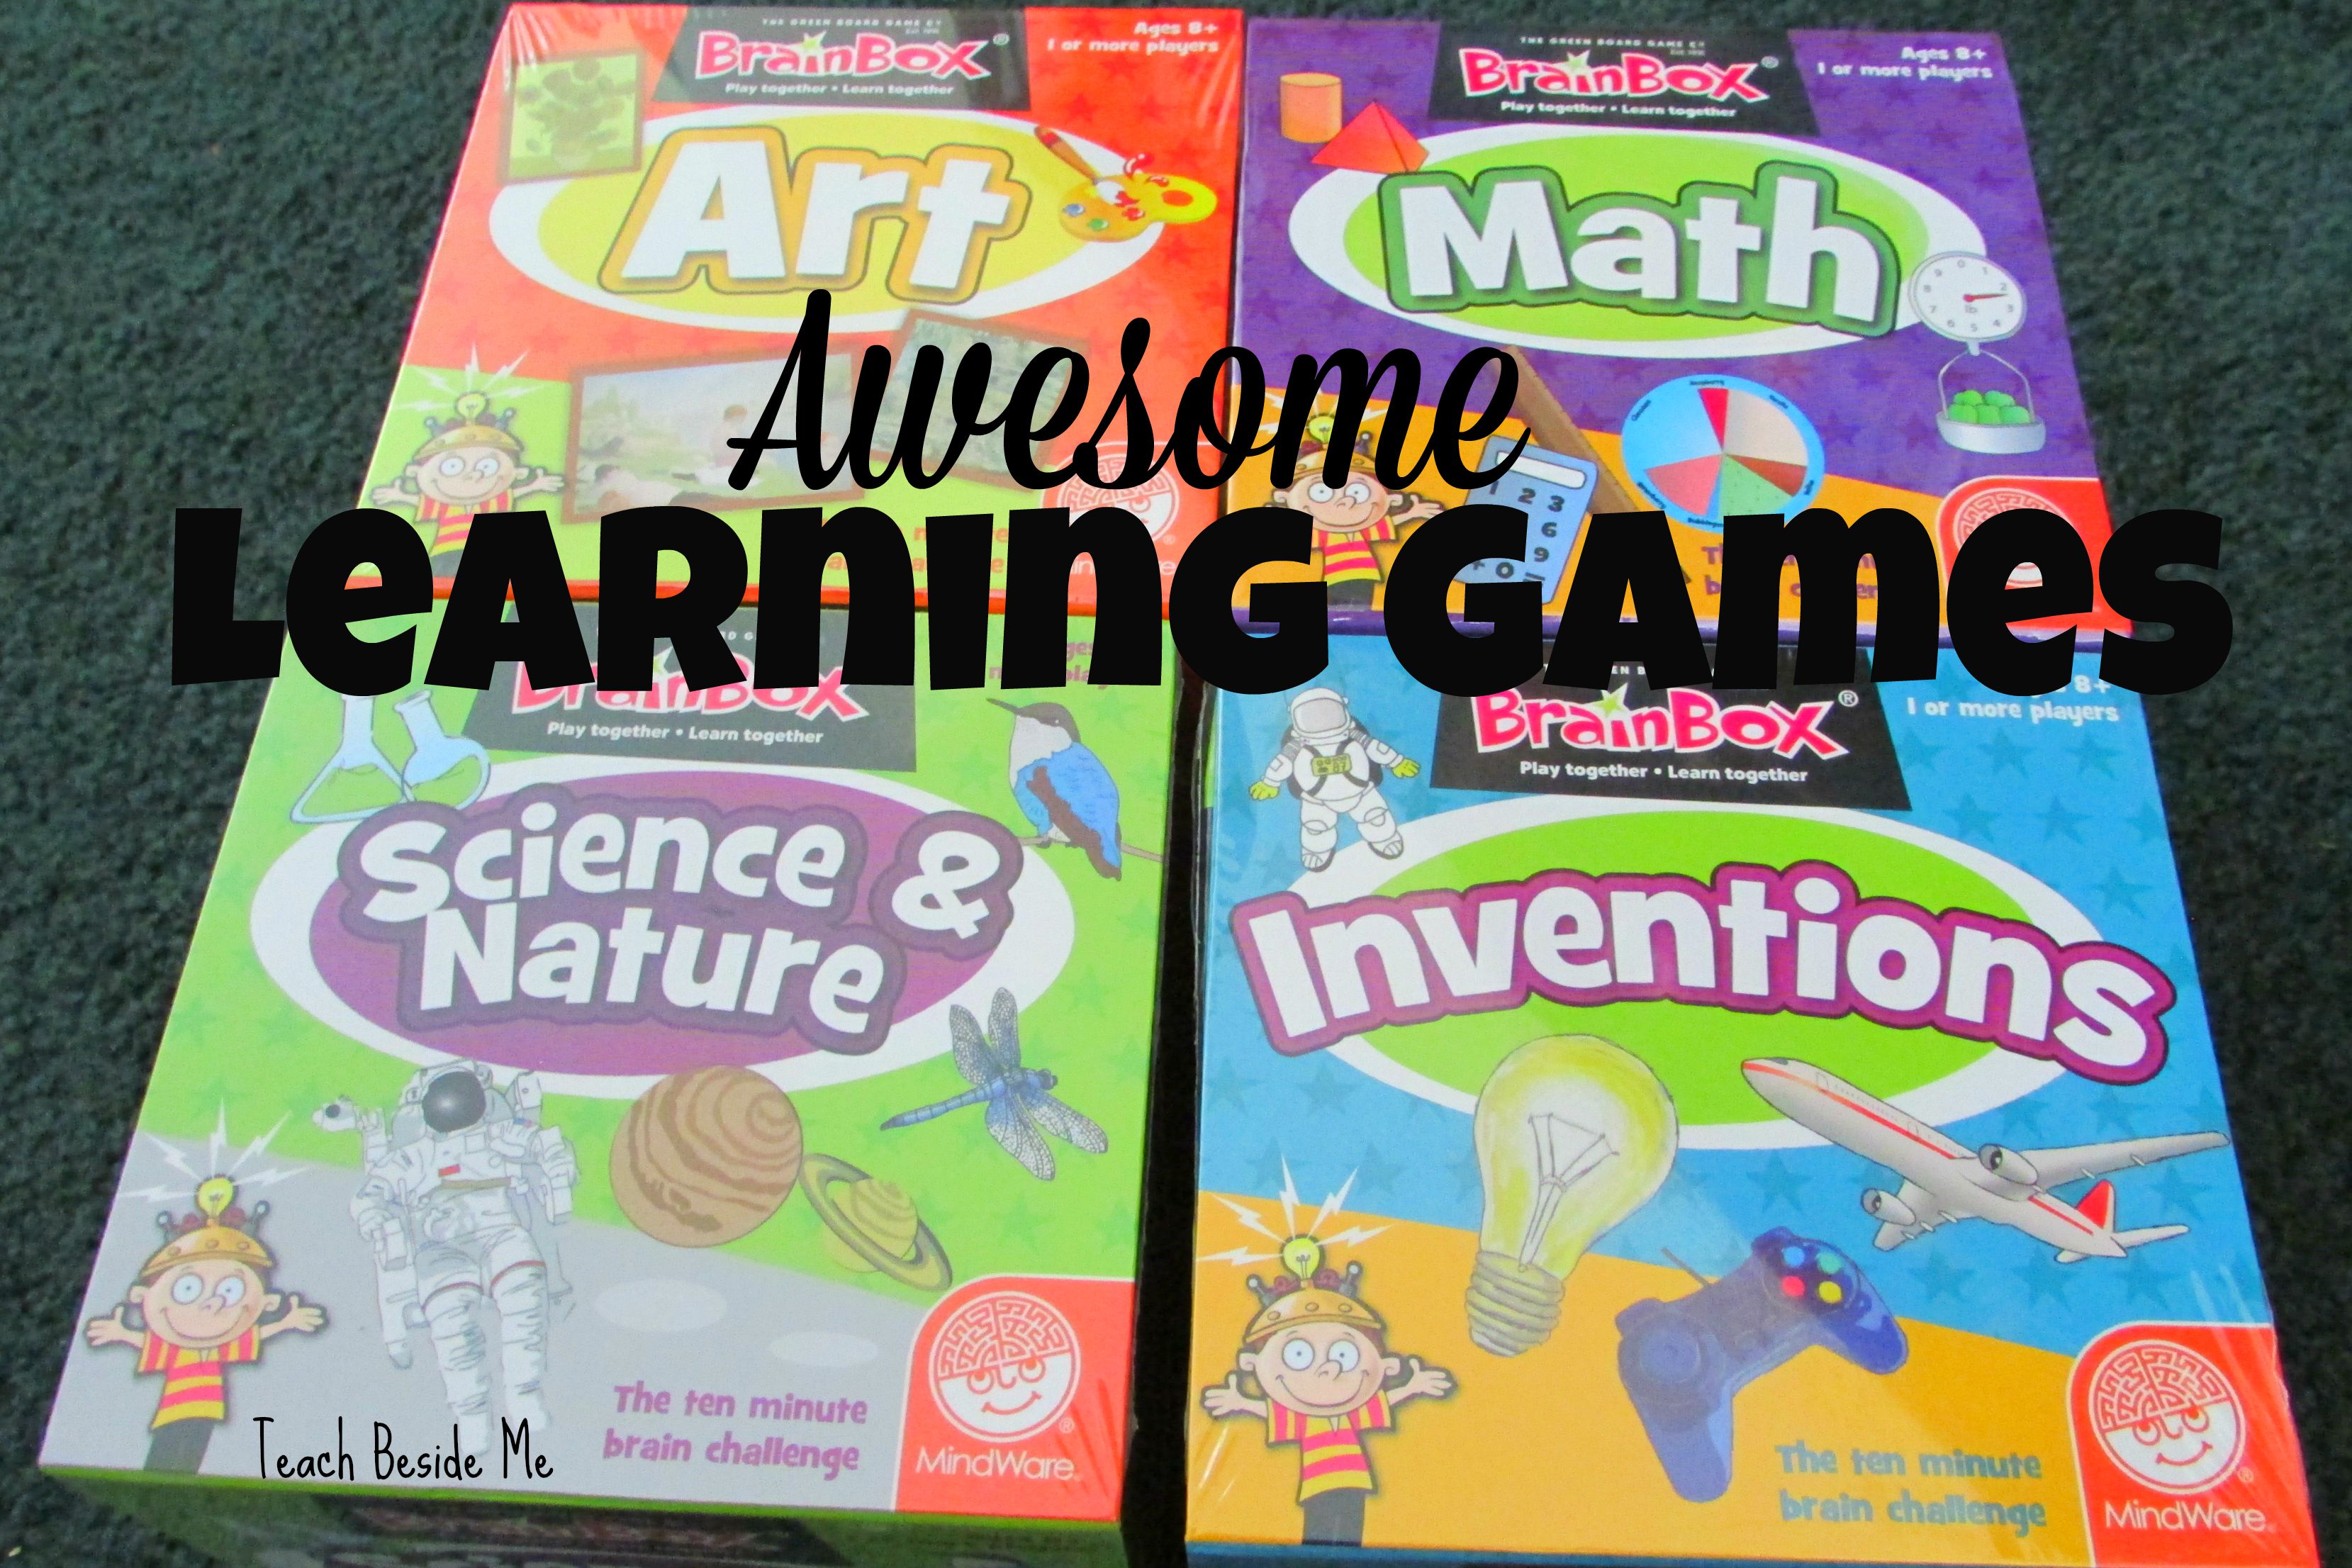 Reading Mathematics Geography BrainBox Snap Card Games Educational Science 